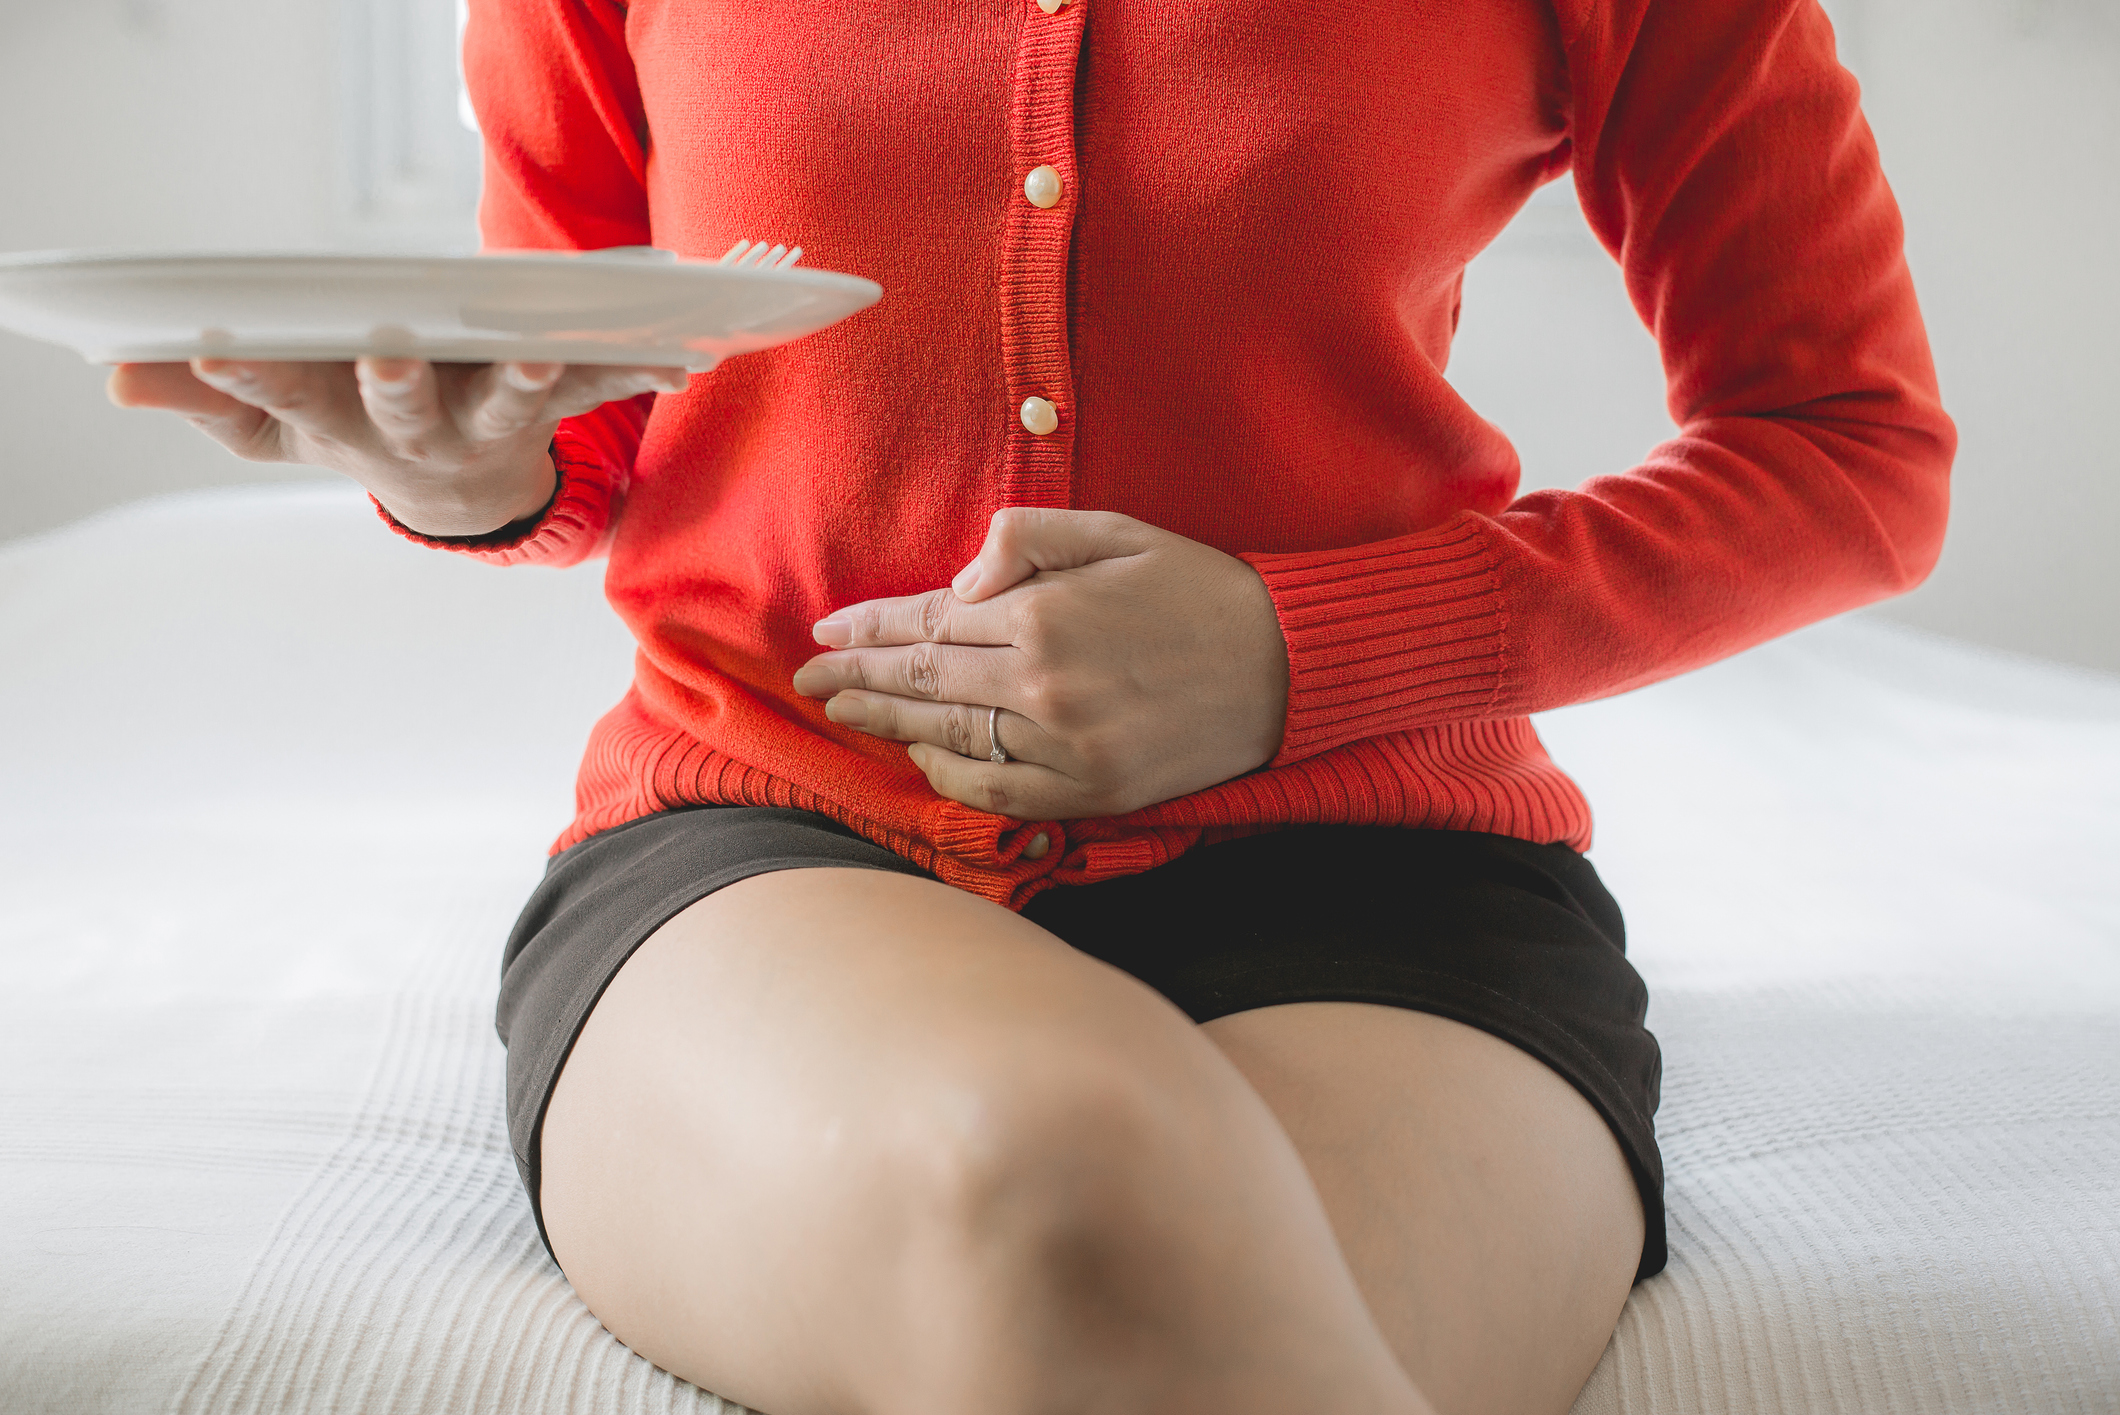 An image of a woman sitting on a bed holding her stomach in pain after eating.